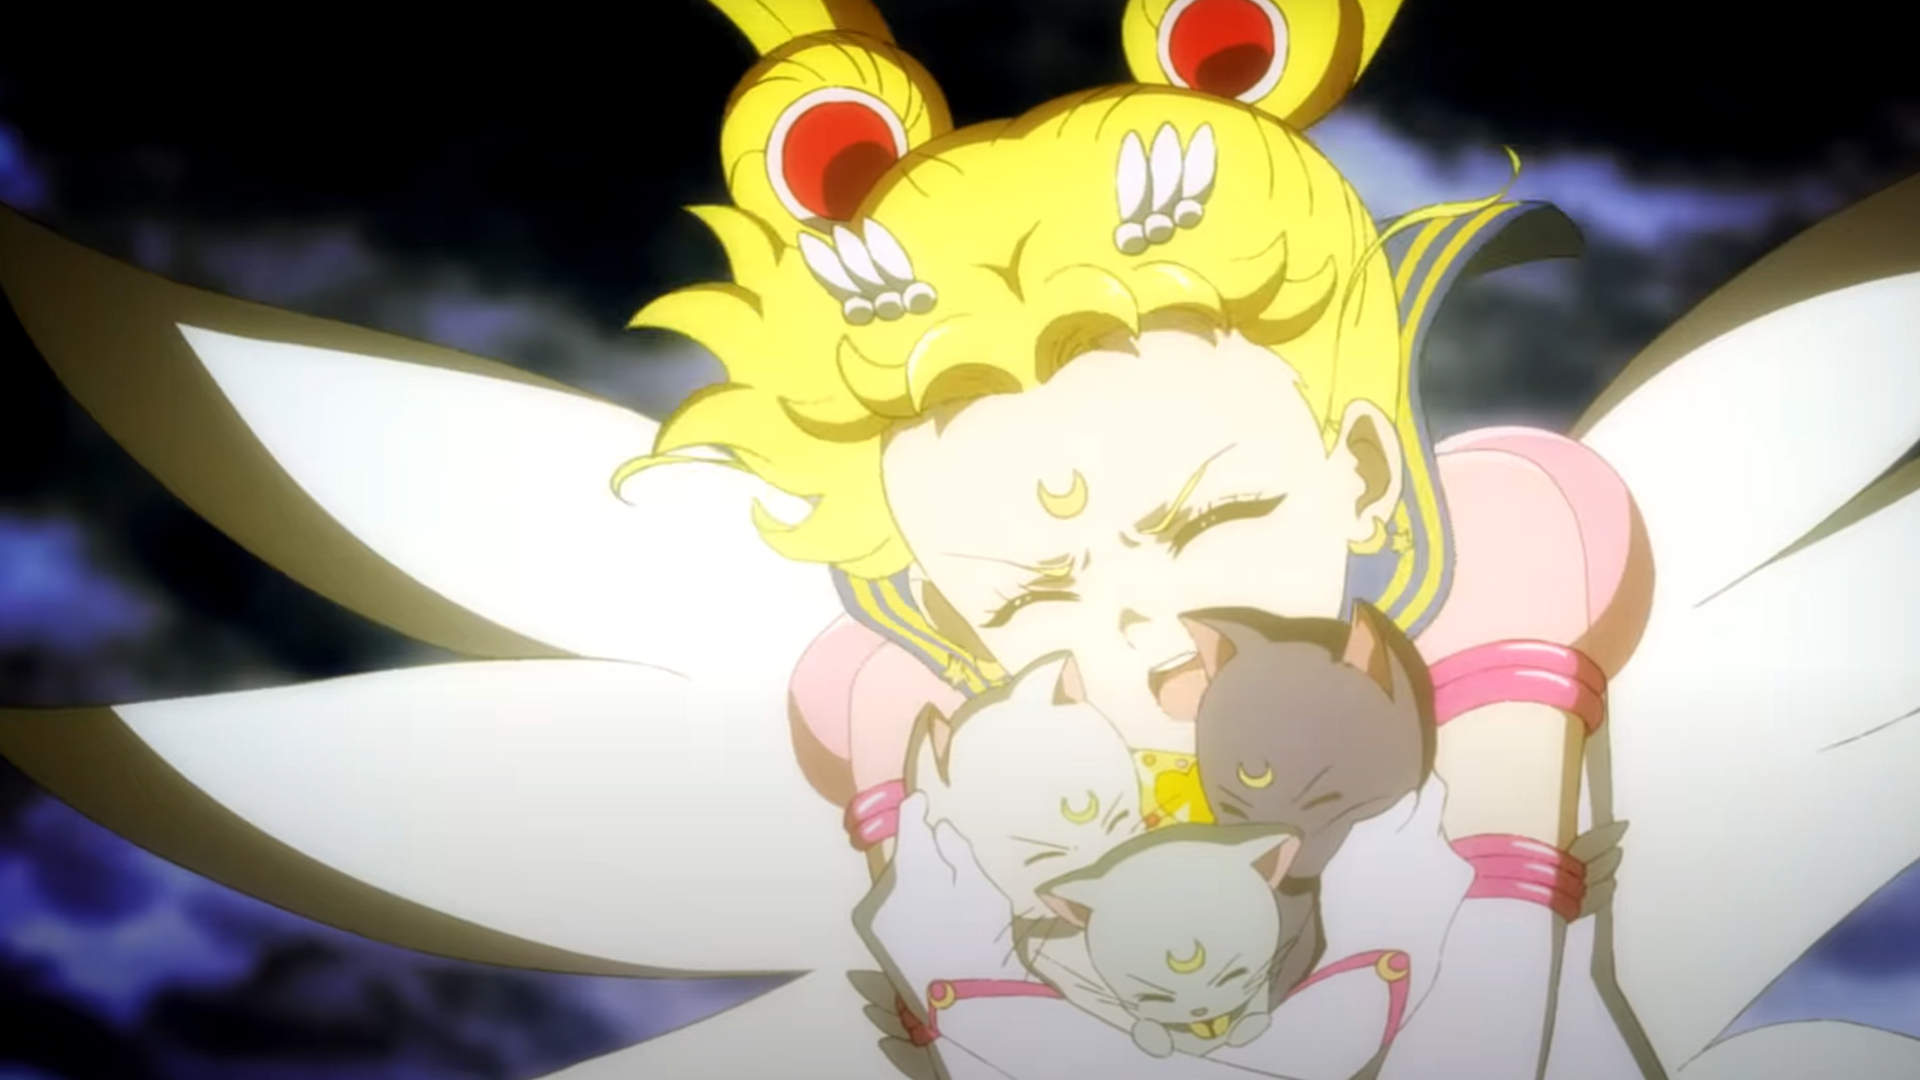 Sailor Moon Cosmos: The Movie Trailer Released